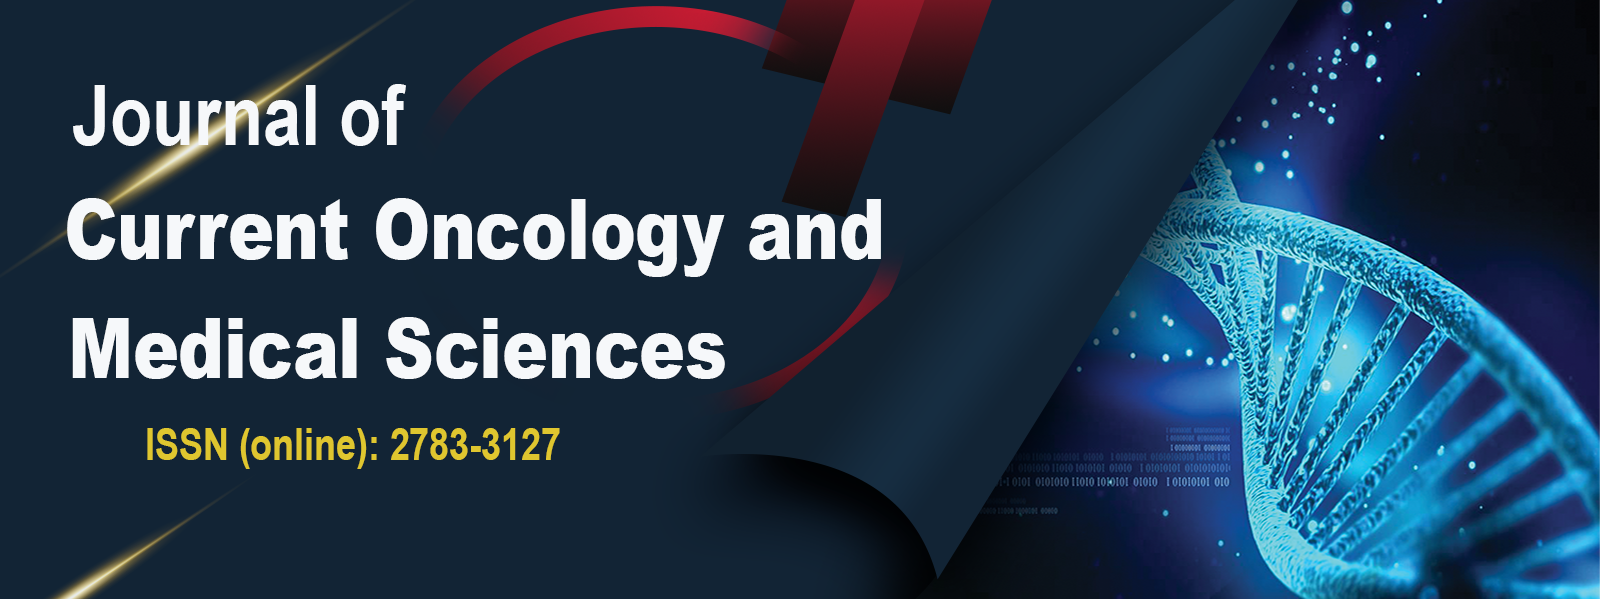 Journal of Current Oncology and Medical Sciences (JCOMS)